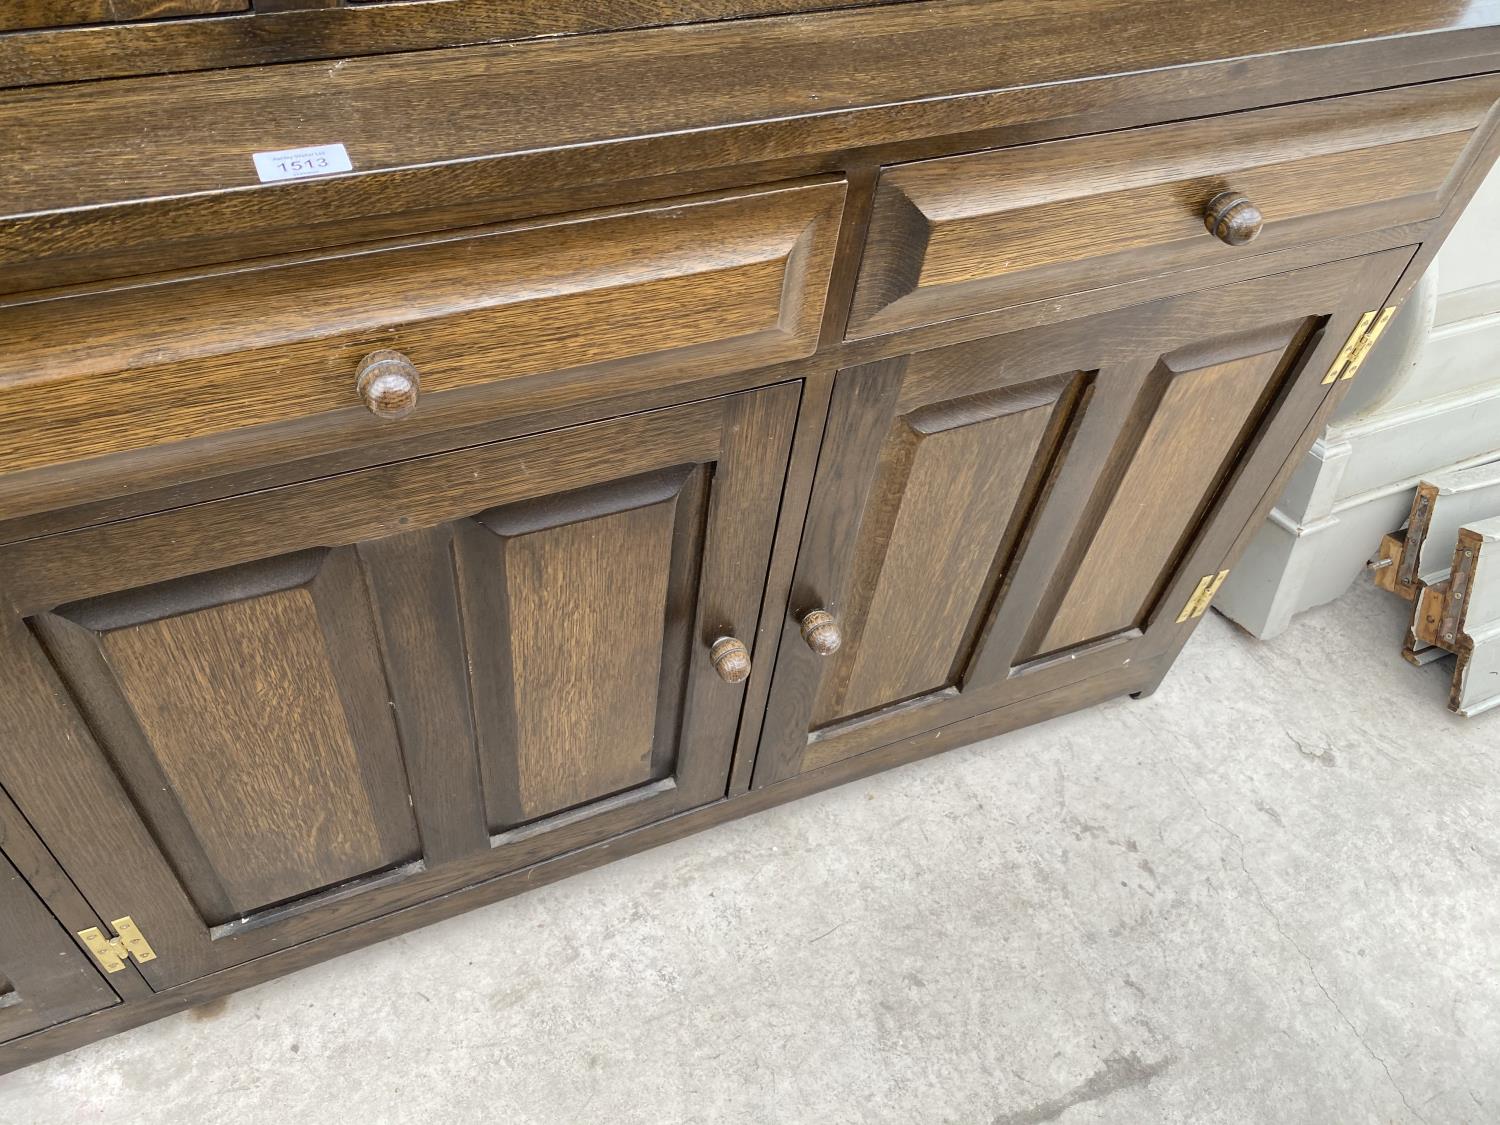 A LARGE SOLID OAK CABINET WITH THREE LOWER DOORS AND DRAWERS AND FOUR UPPER GLAZED DOORS - Image 5 of 5